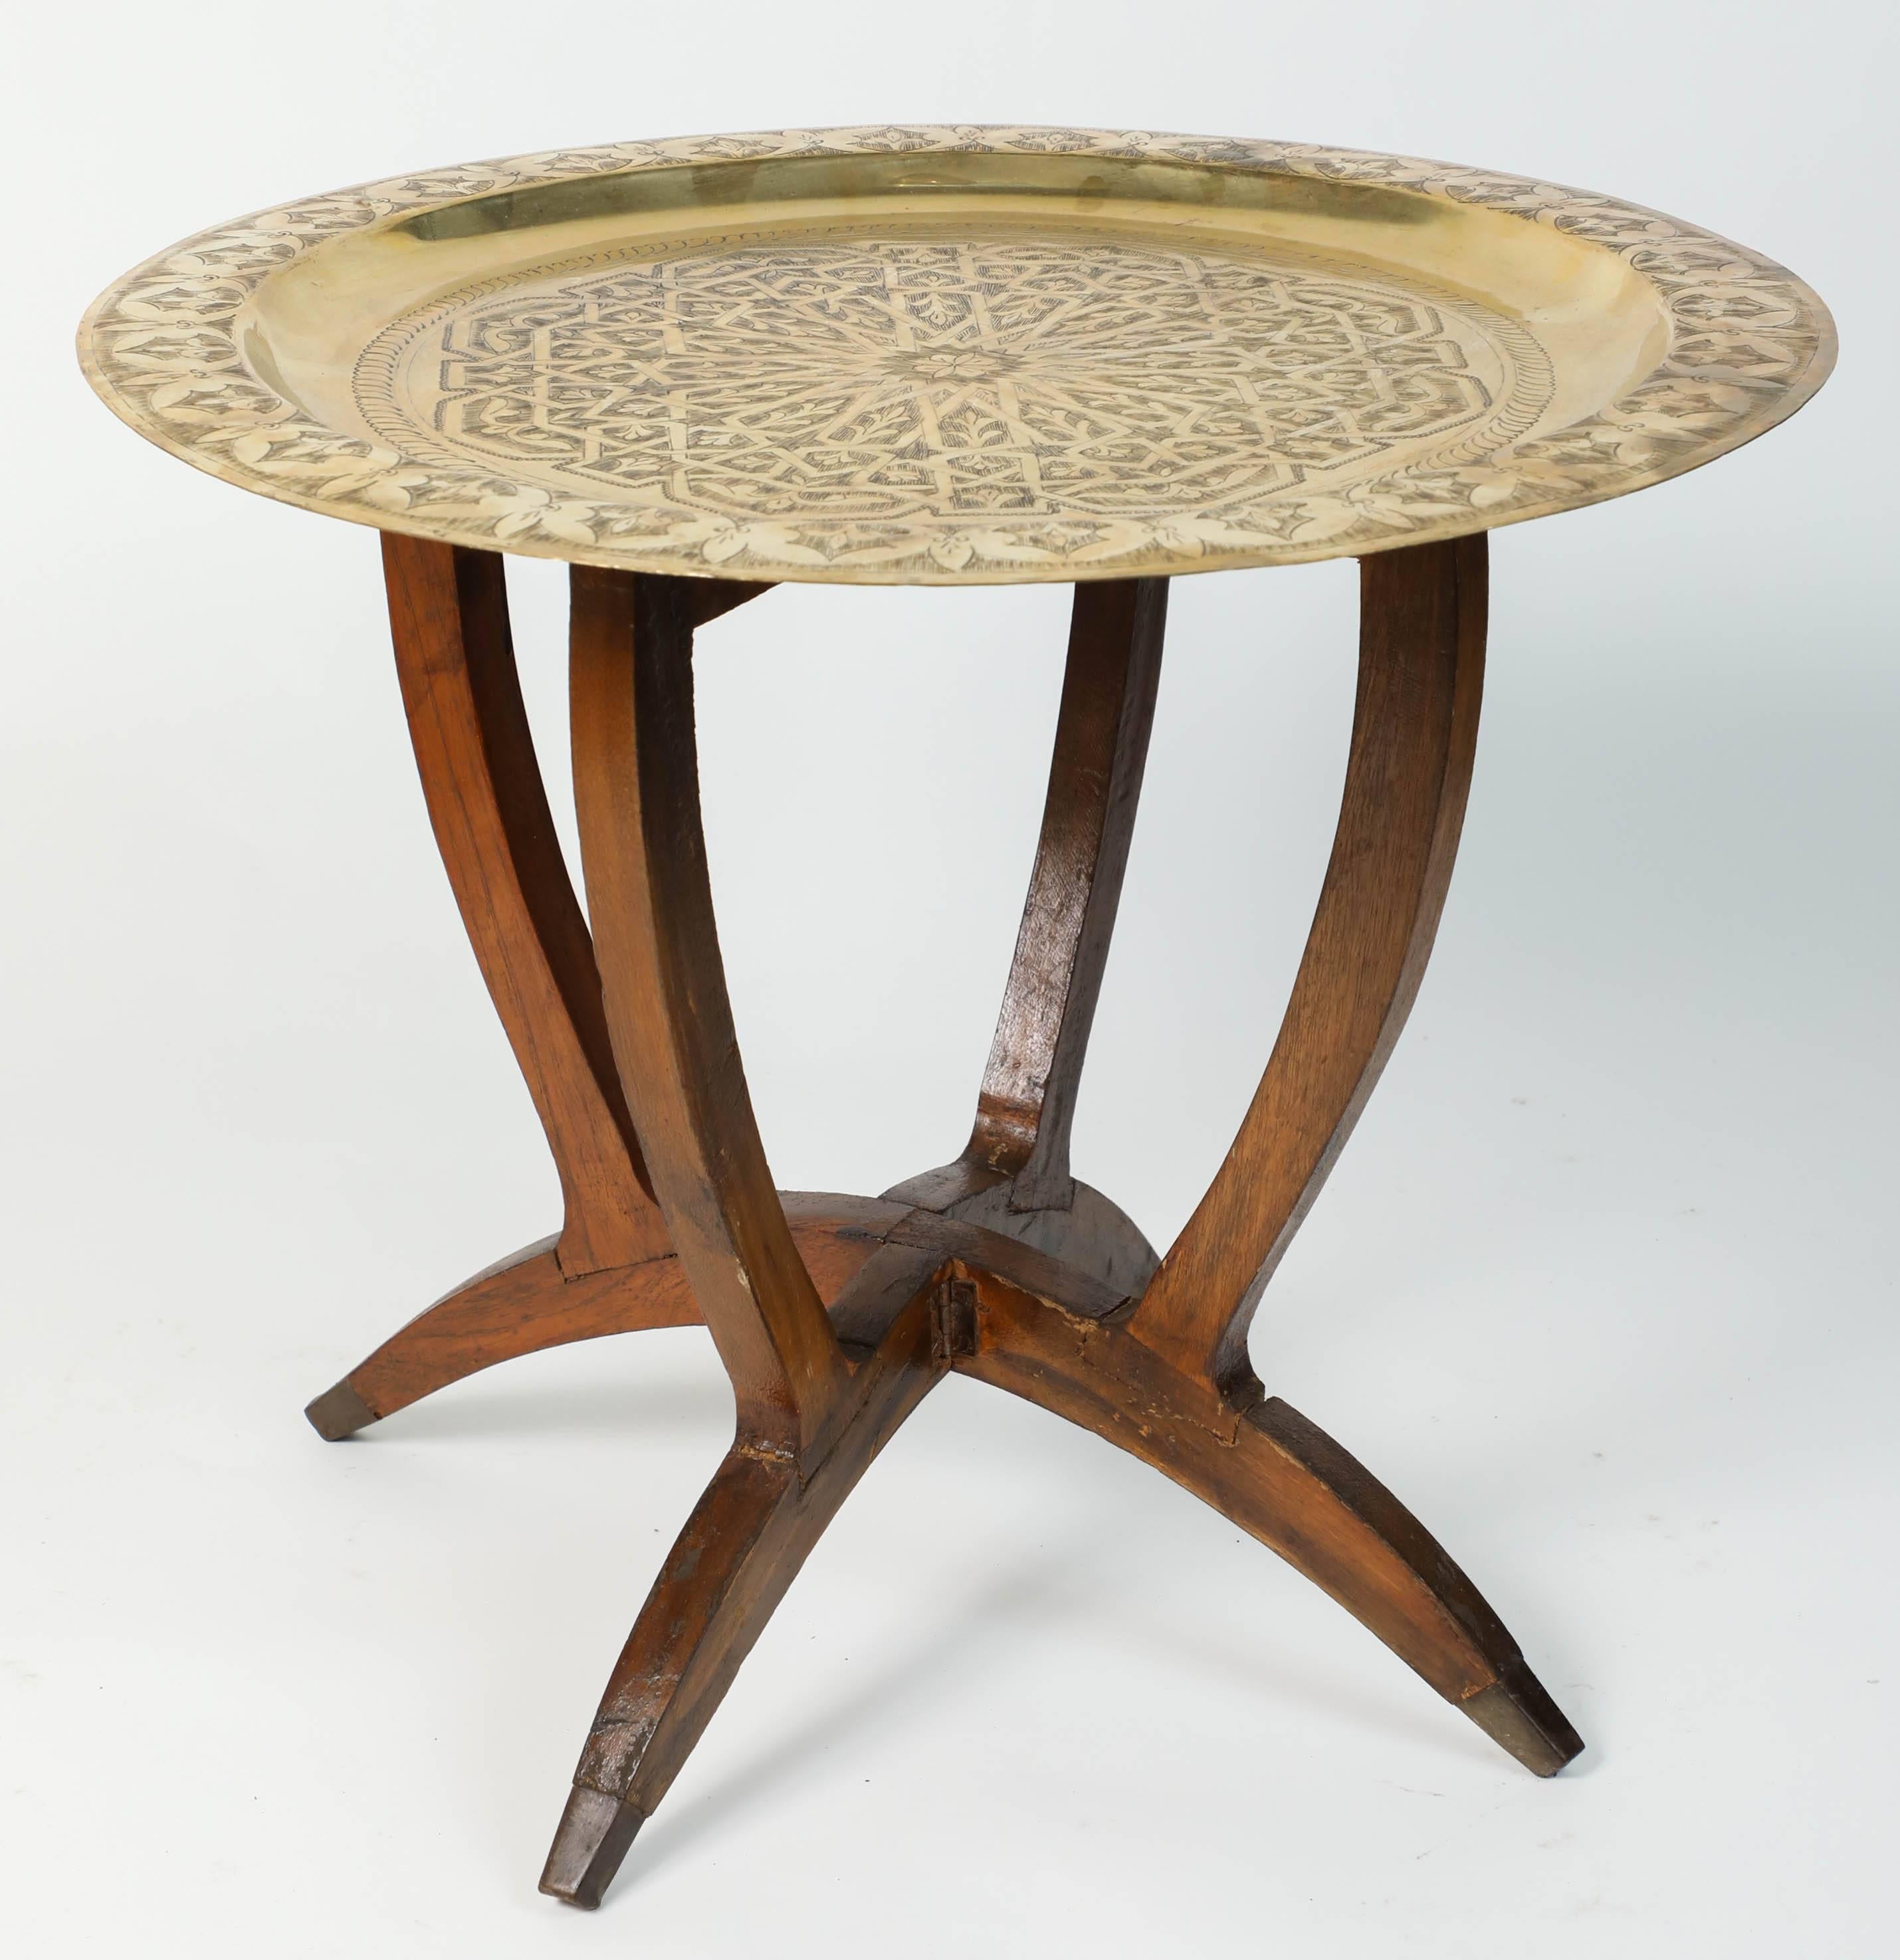 Moroccan round polished brass tray side table. 
Polished Middle Eastern style brass tray, standing on folding base with four legs and brass finals. 
Moorish style hand-hammered brass tray table, Middle Eastern, Moorish style polished brass tray